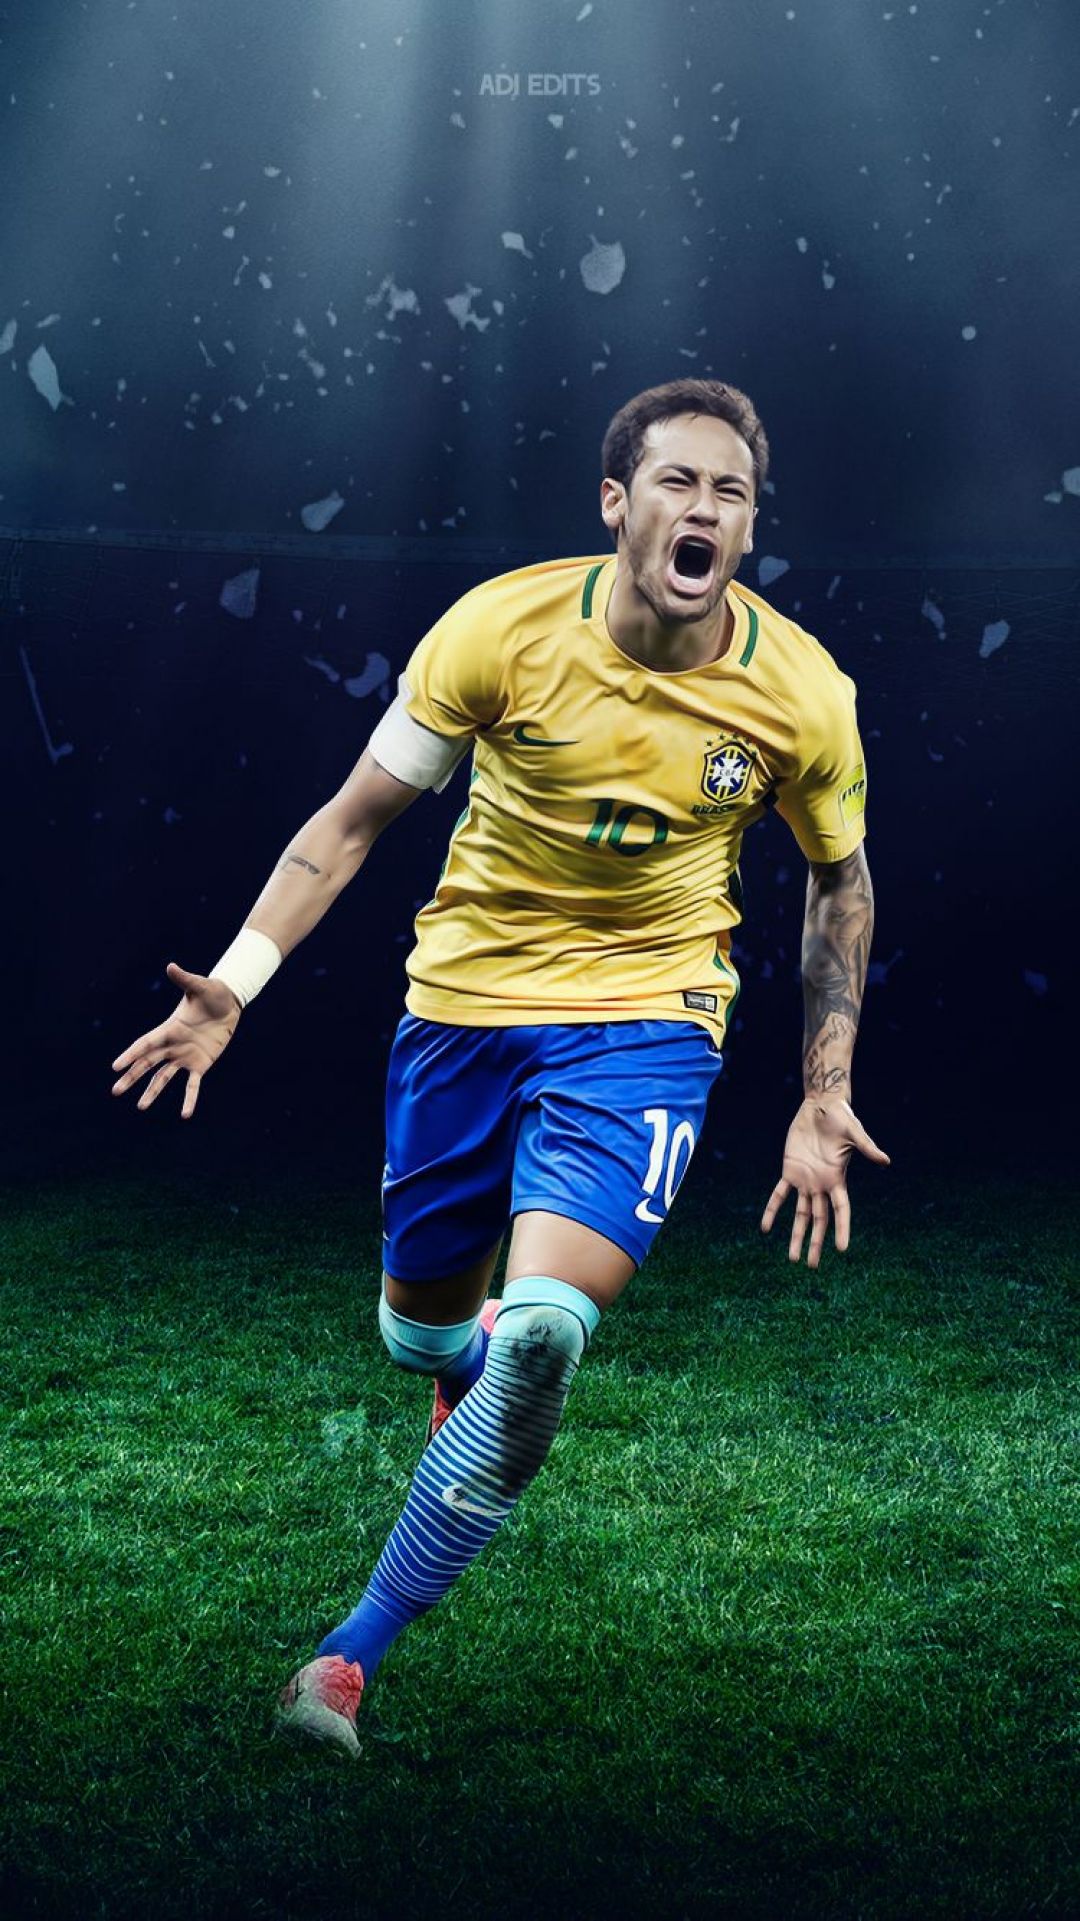 Android, Iphone, Desktop Hd Backgrounds / Wallpapers - Neymar Wallpapers Iphone - HD Wallpaper 